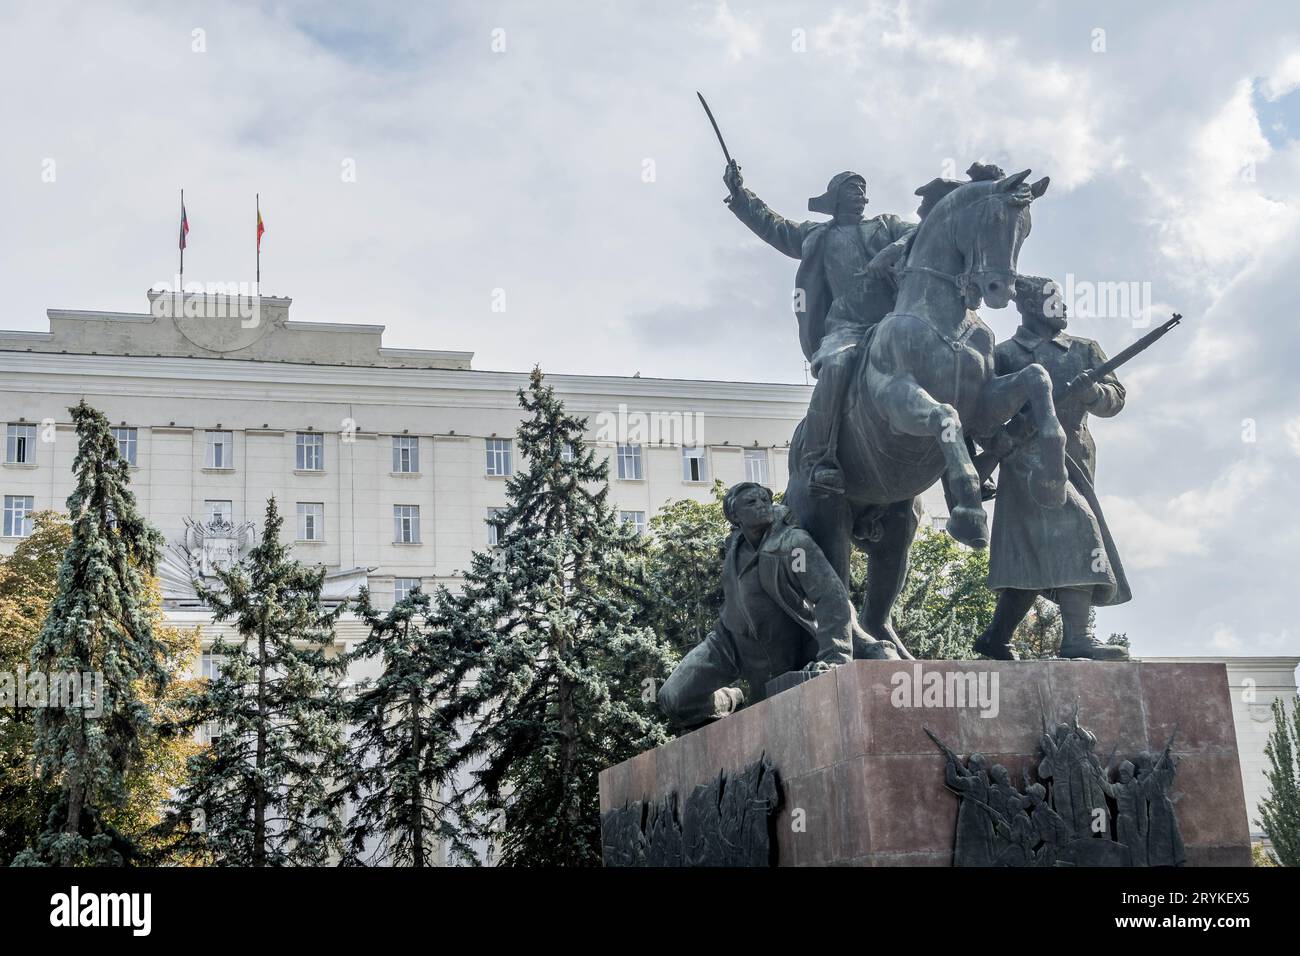 The monument of the soldiers at Russian Civil War at the city of Rostov-on-Don in southern Russia. Stock Photo